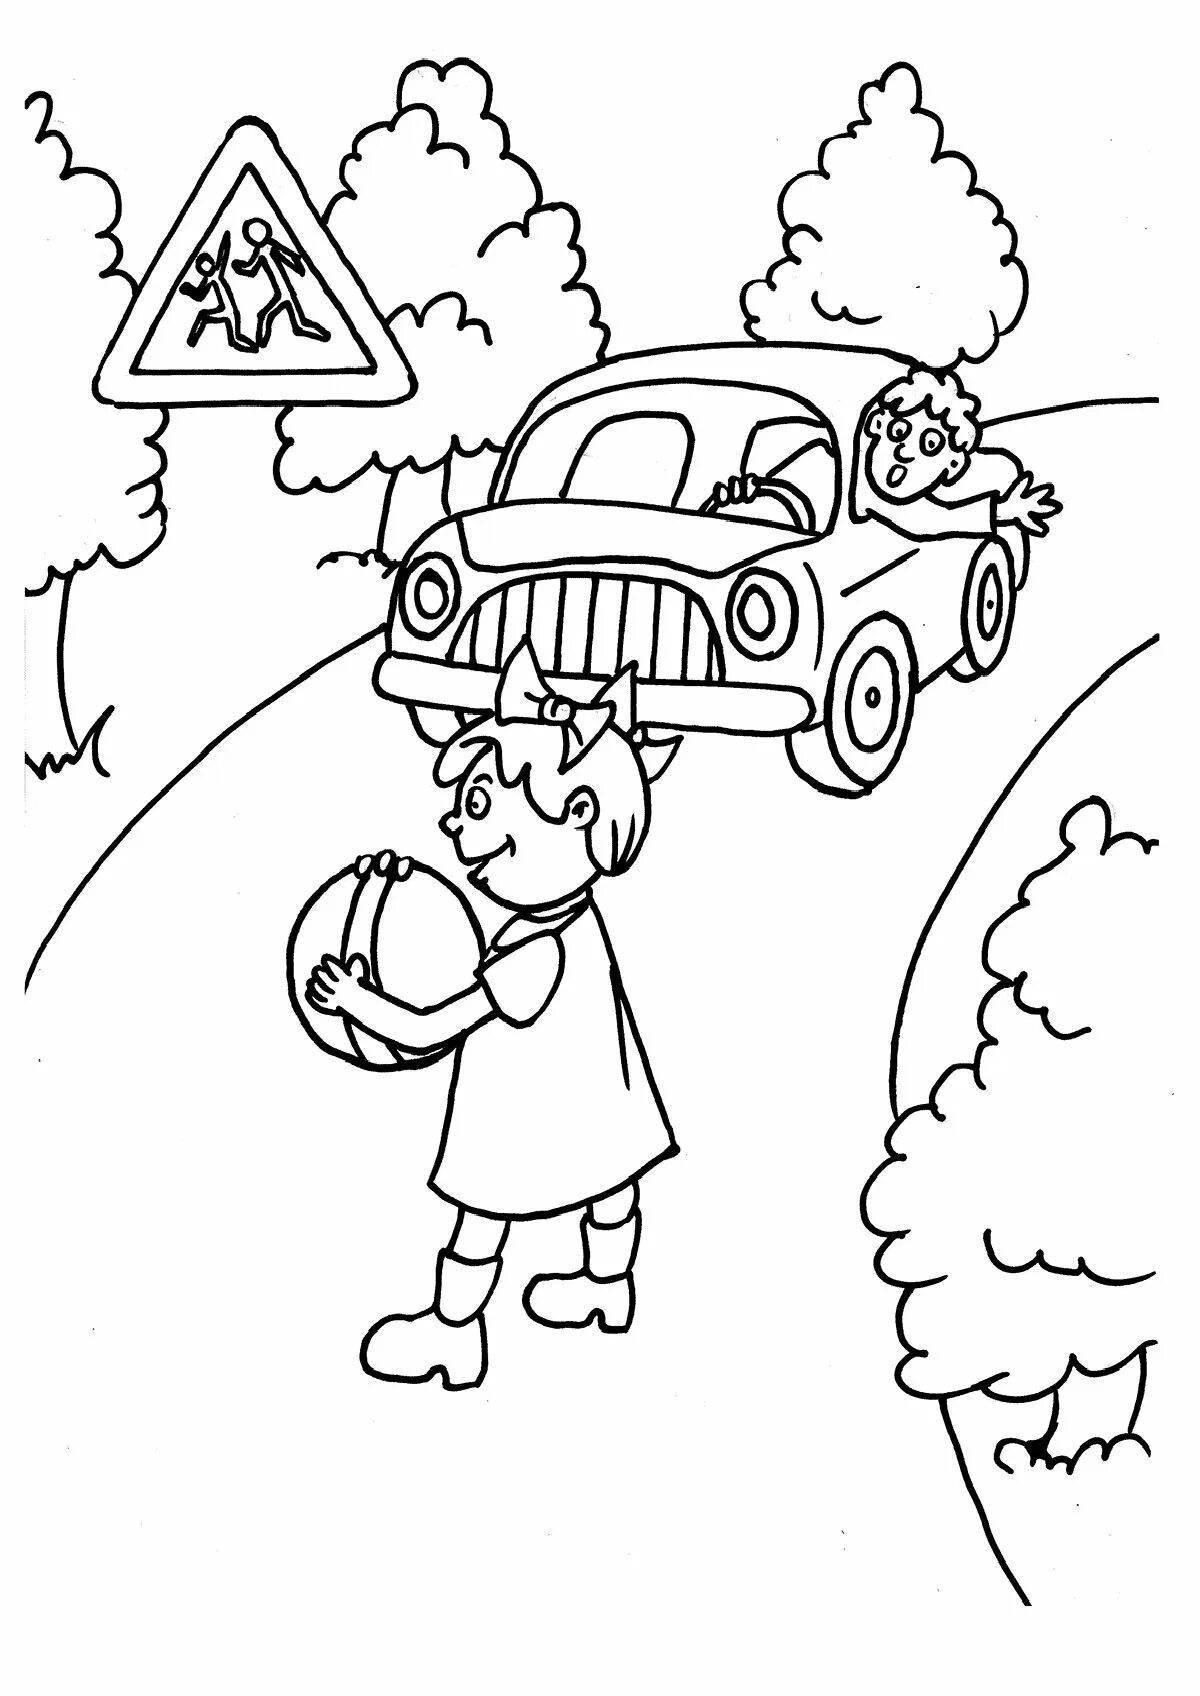 Safety fun coloring page